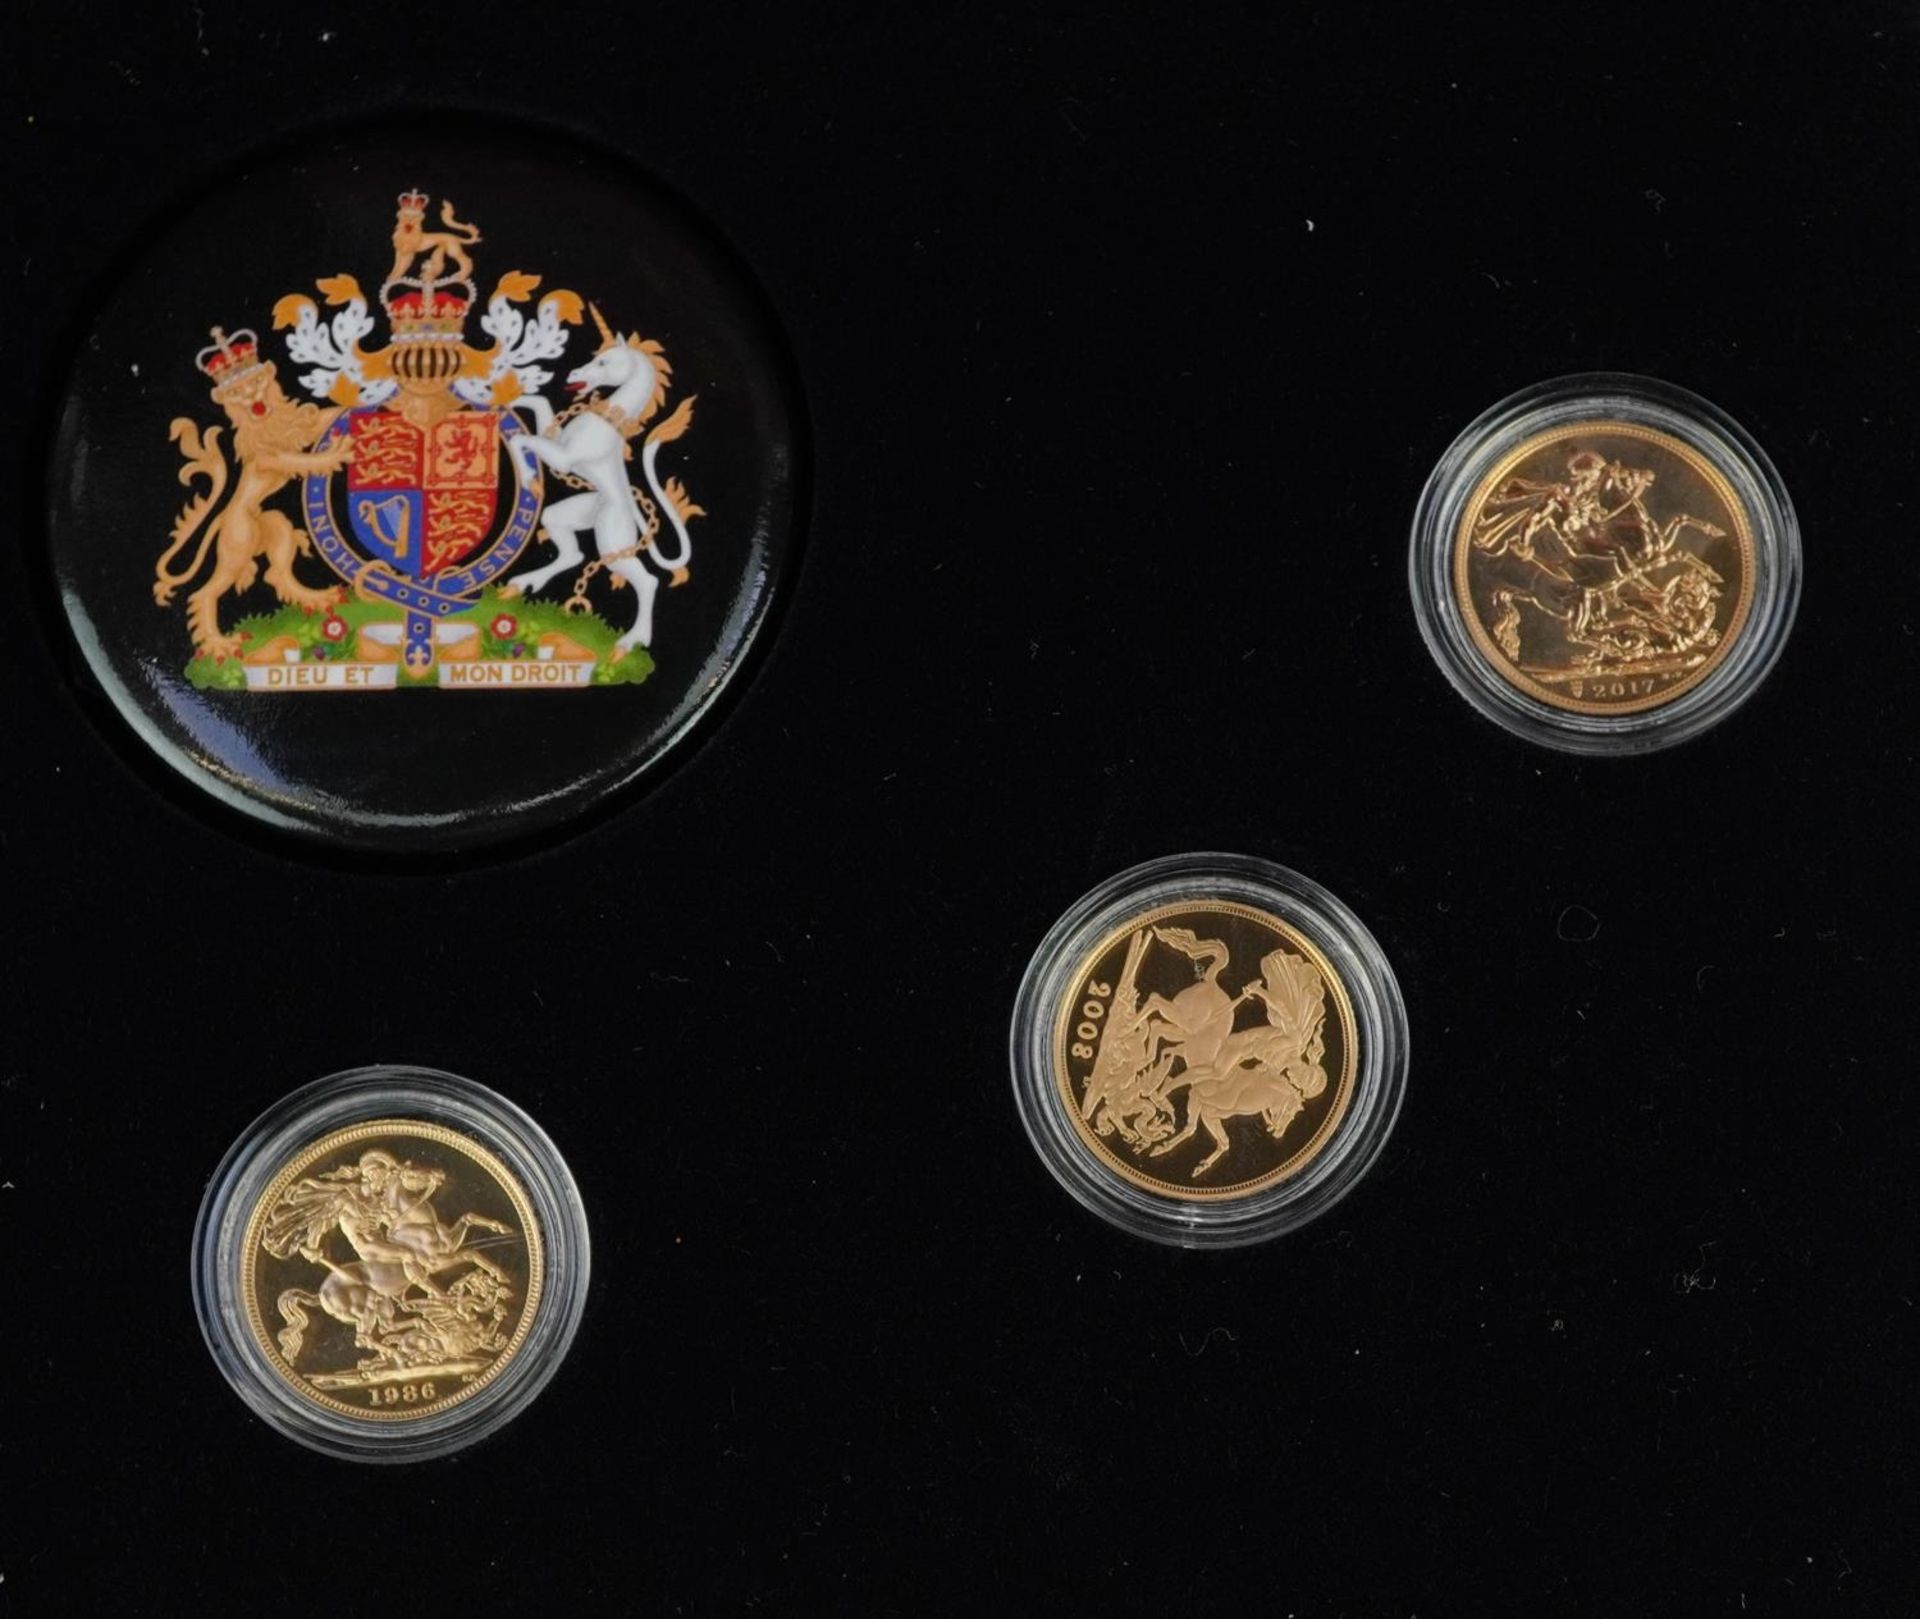 Elizabeth II Sovereign Jubilee collection comprising five gold sovereigns dates 1958, 1974, 1986, - Image 5 of 6